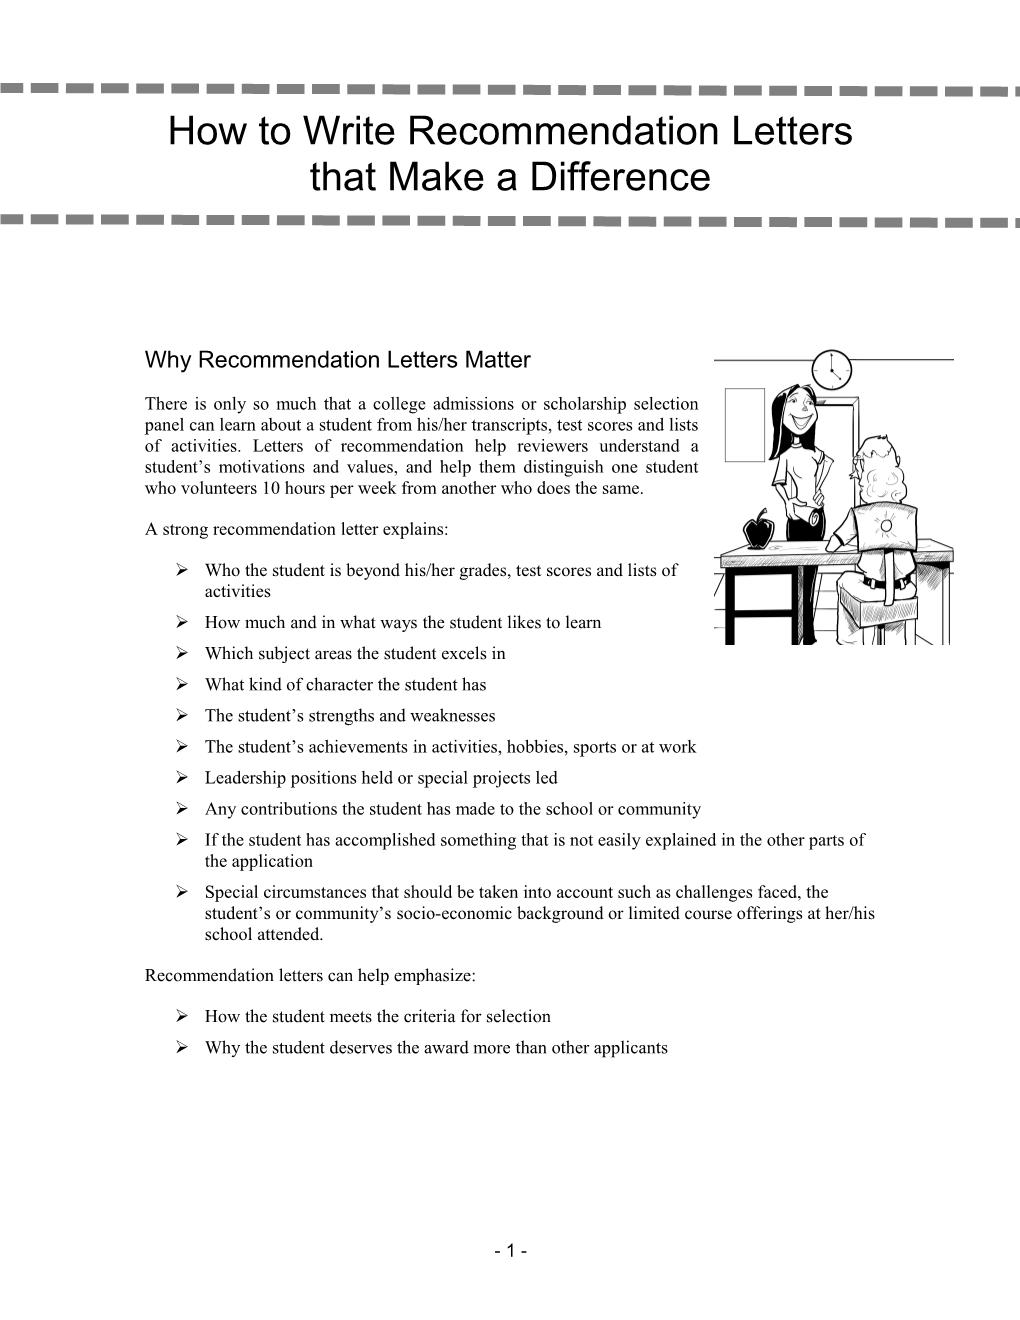 How to Write Recommendation Letters That Make a Difference